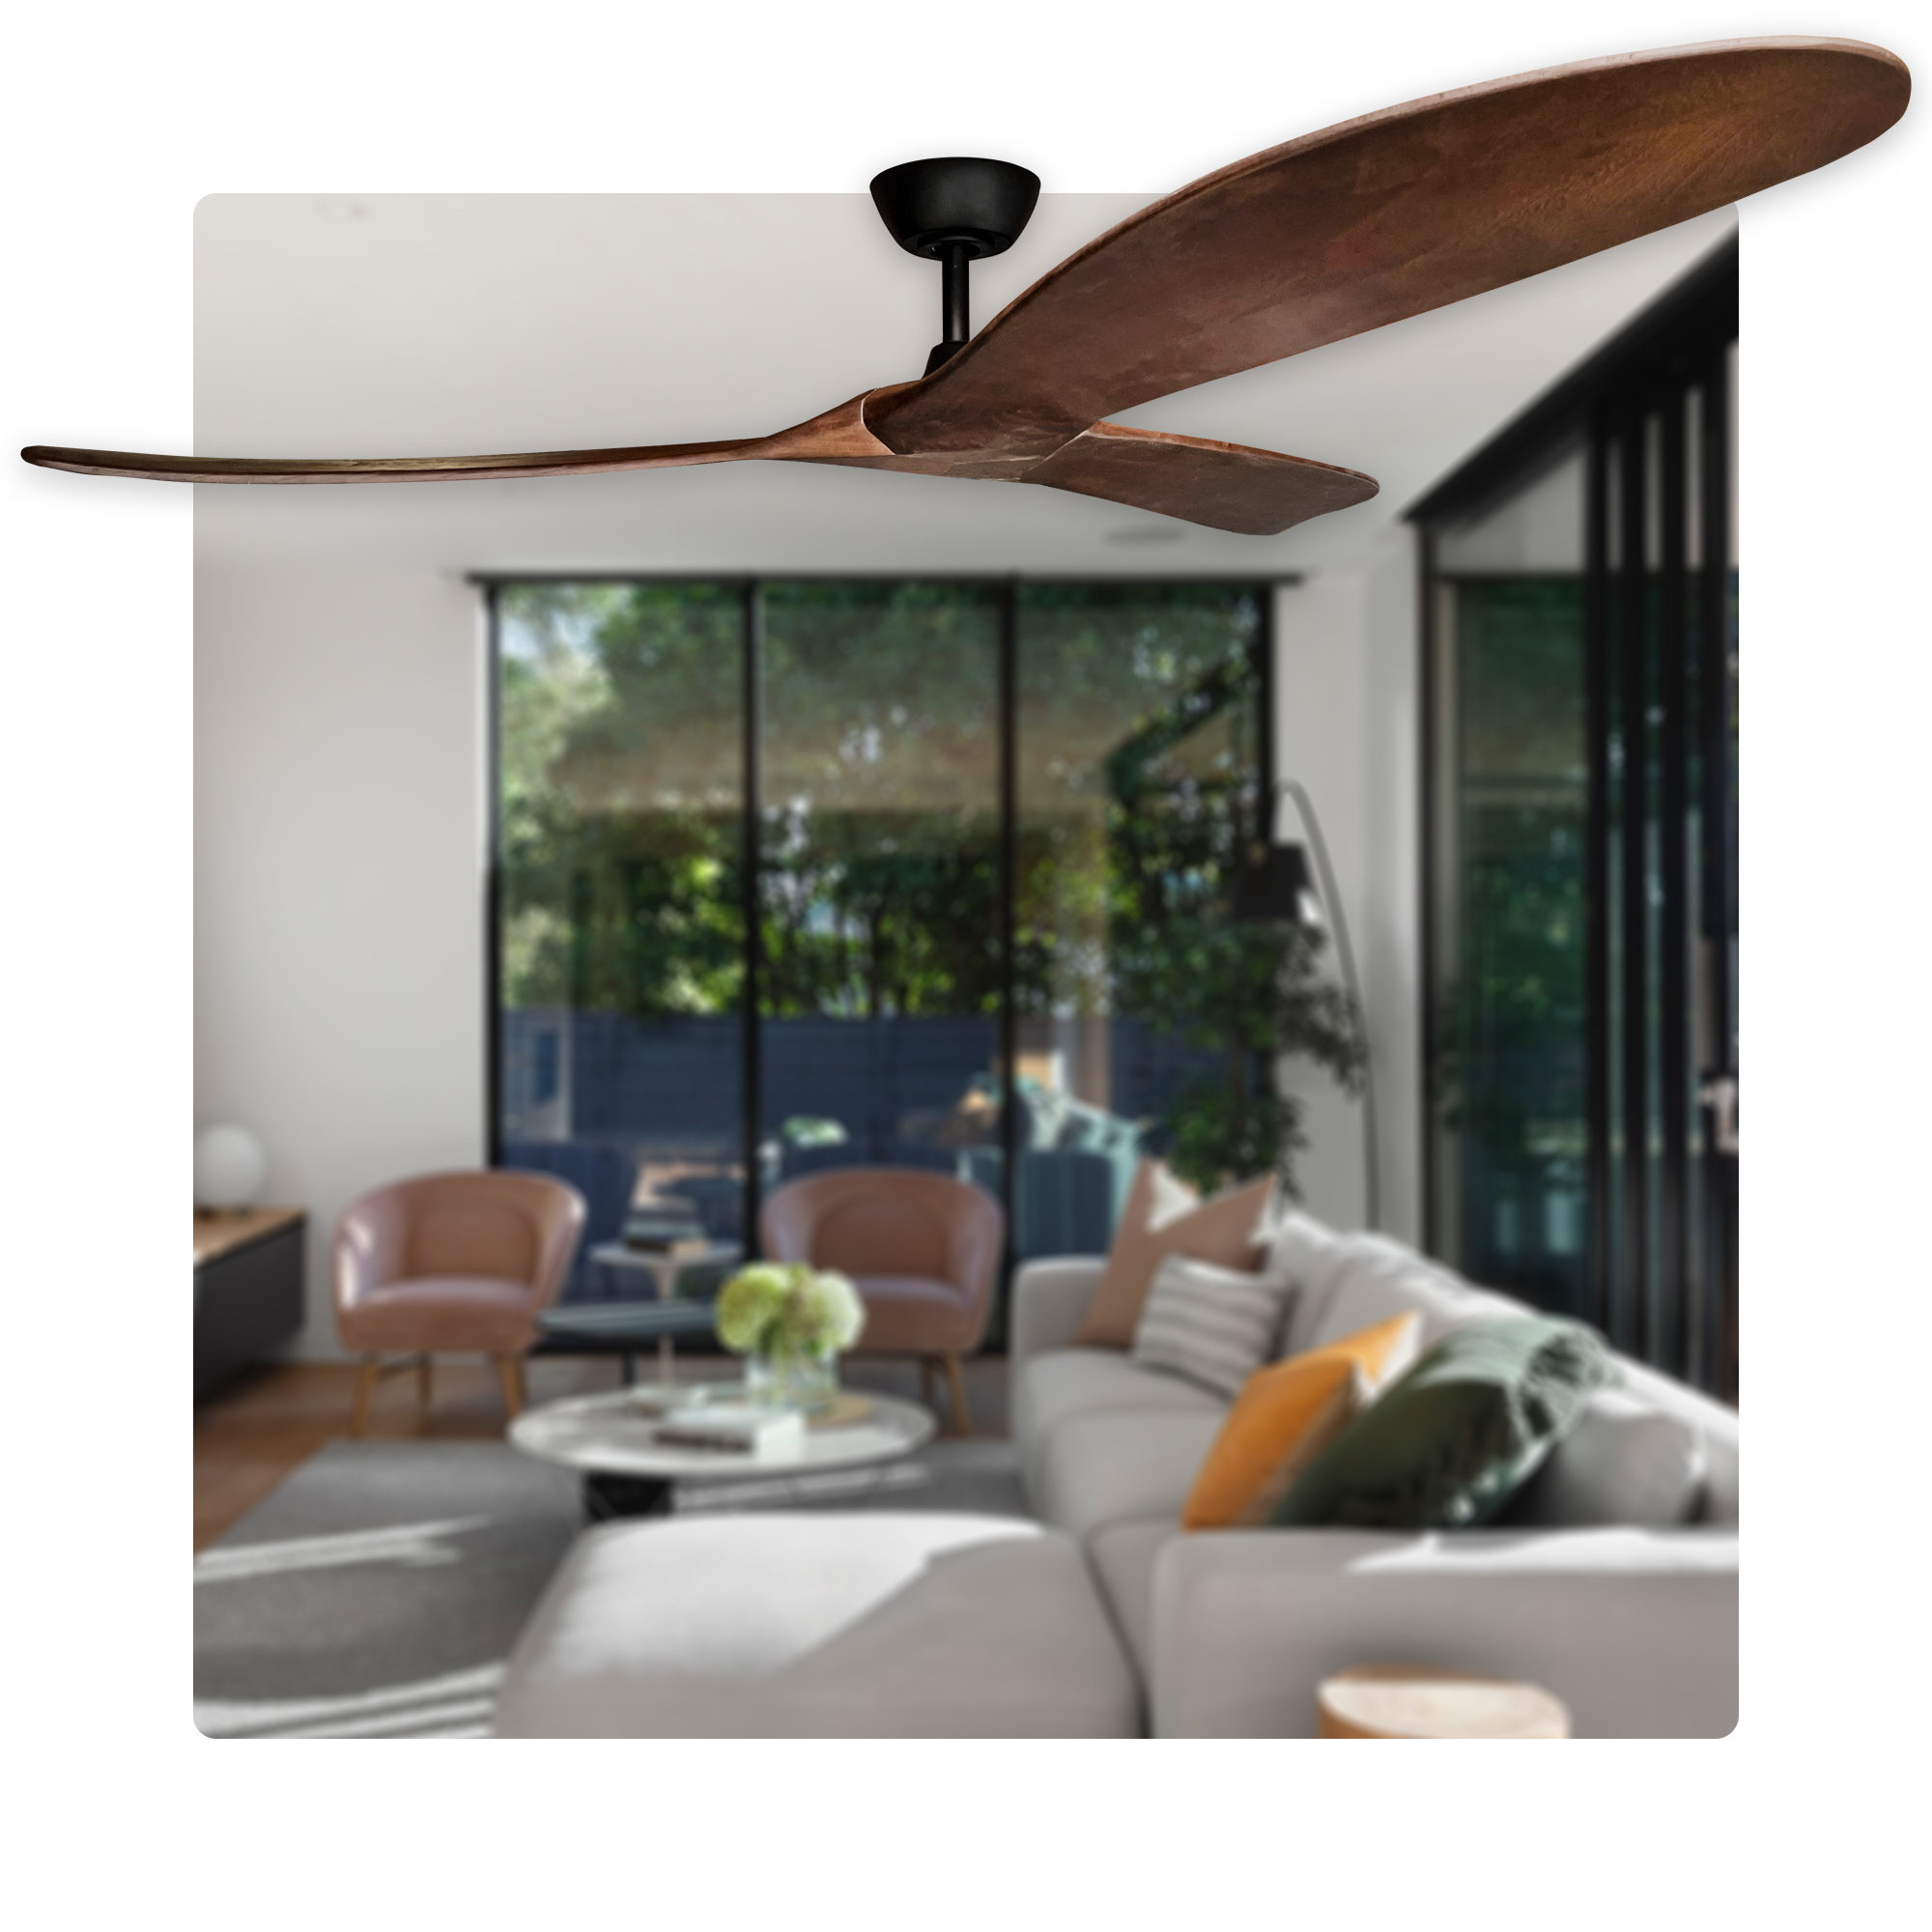 72" Timbr DC Ceiling Fan in Black with Walnut Blades